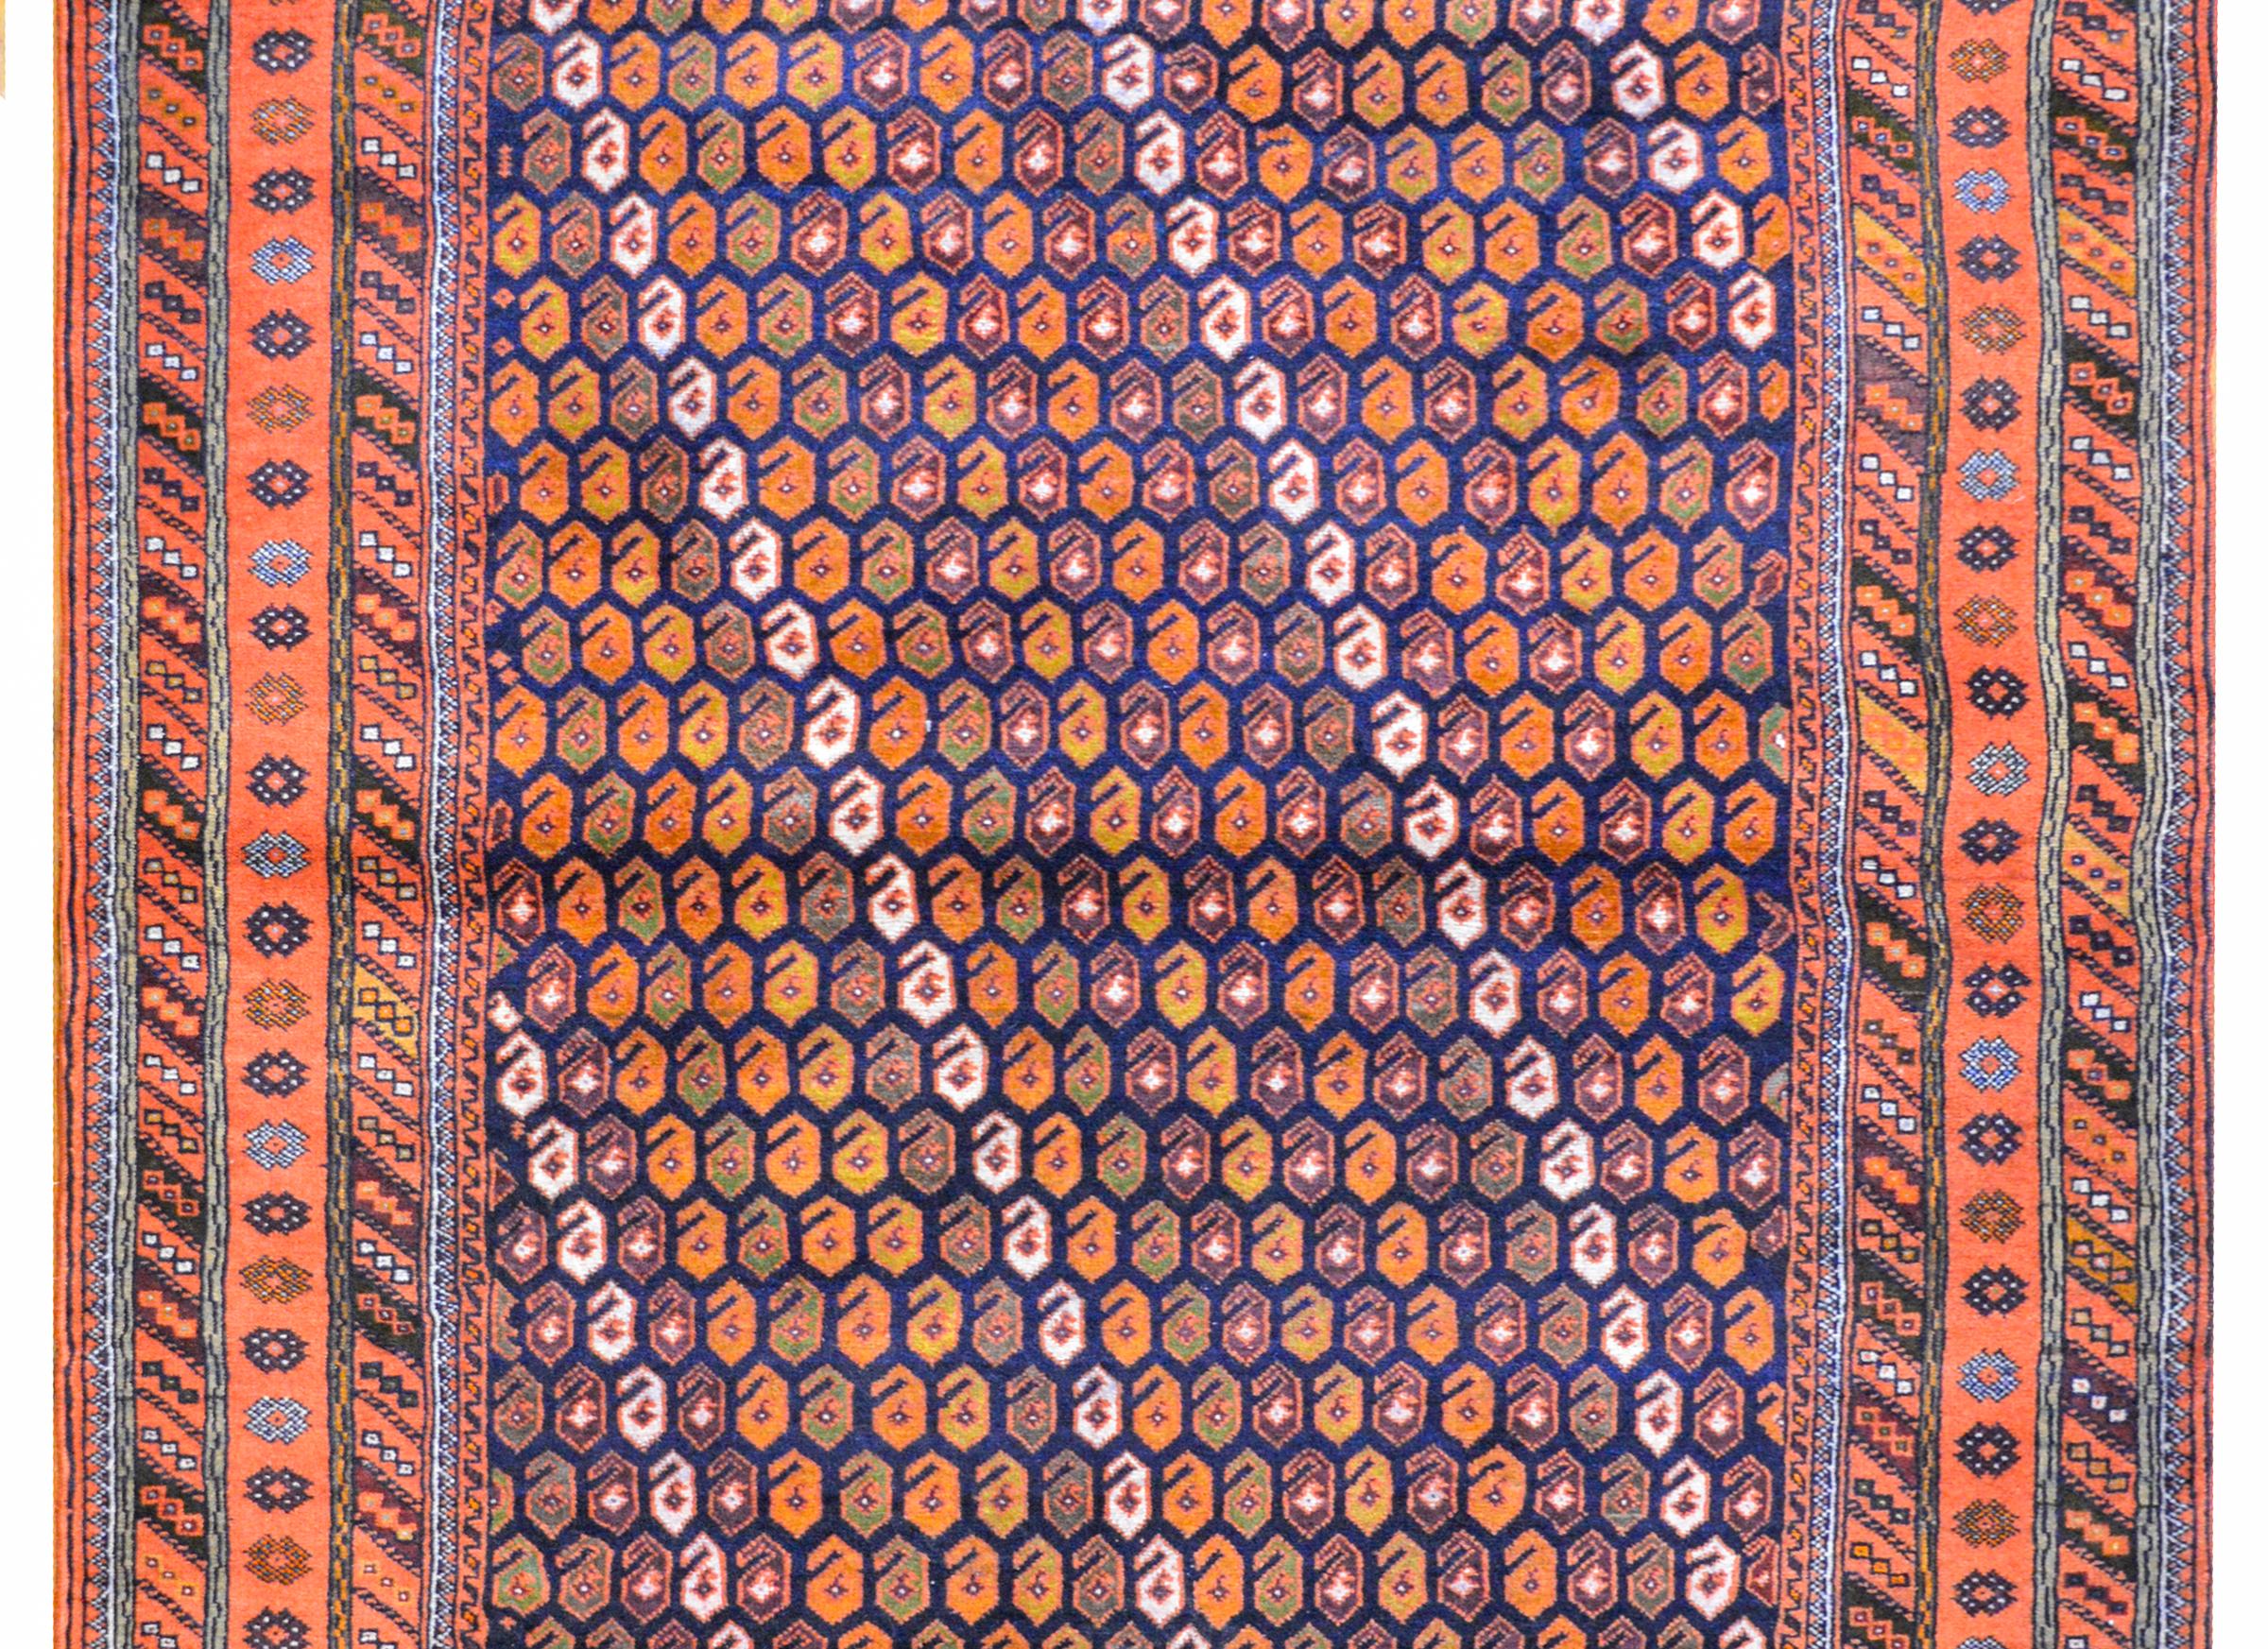 A wonderful early 20th century Persian Shiraz rug with an all-over paisley pattern woven in myriad colors including orange, gold, green, white, and various browns, all on a dark indigo background. The border is composed of a central stylized floral